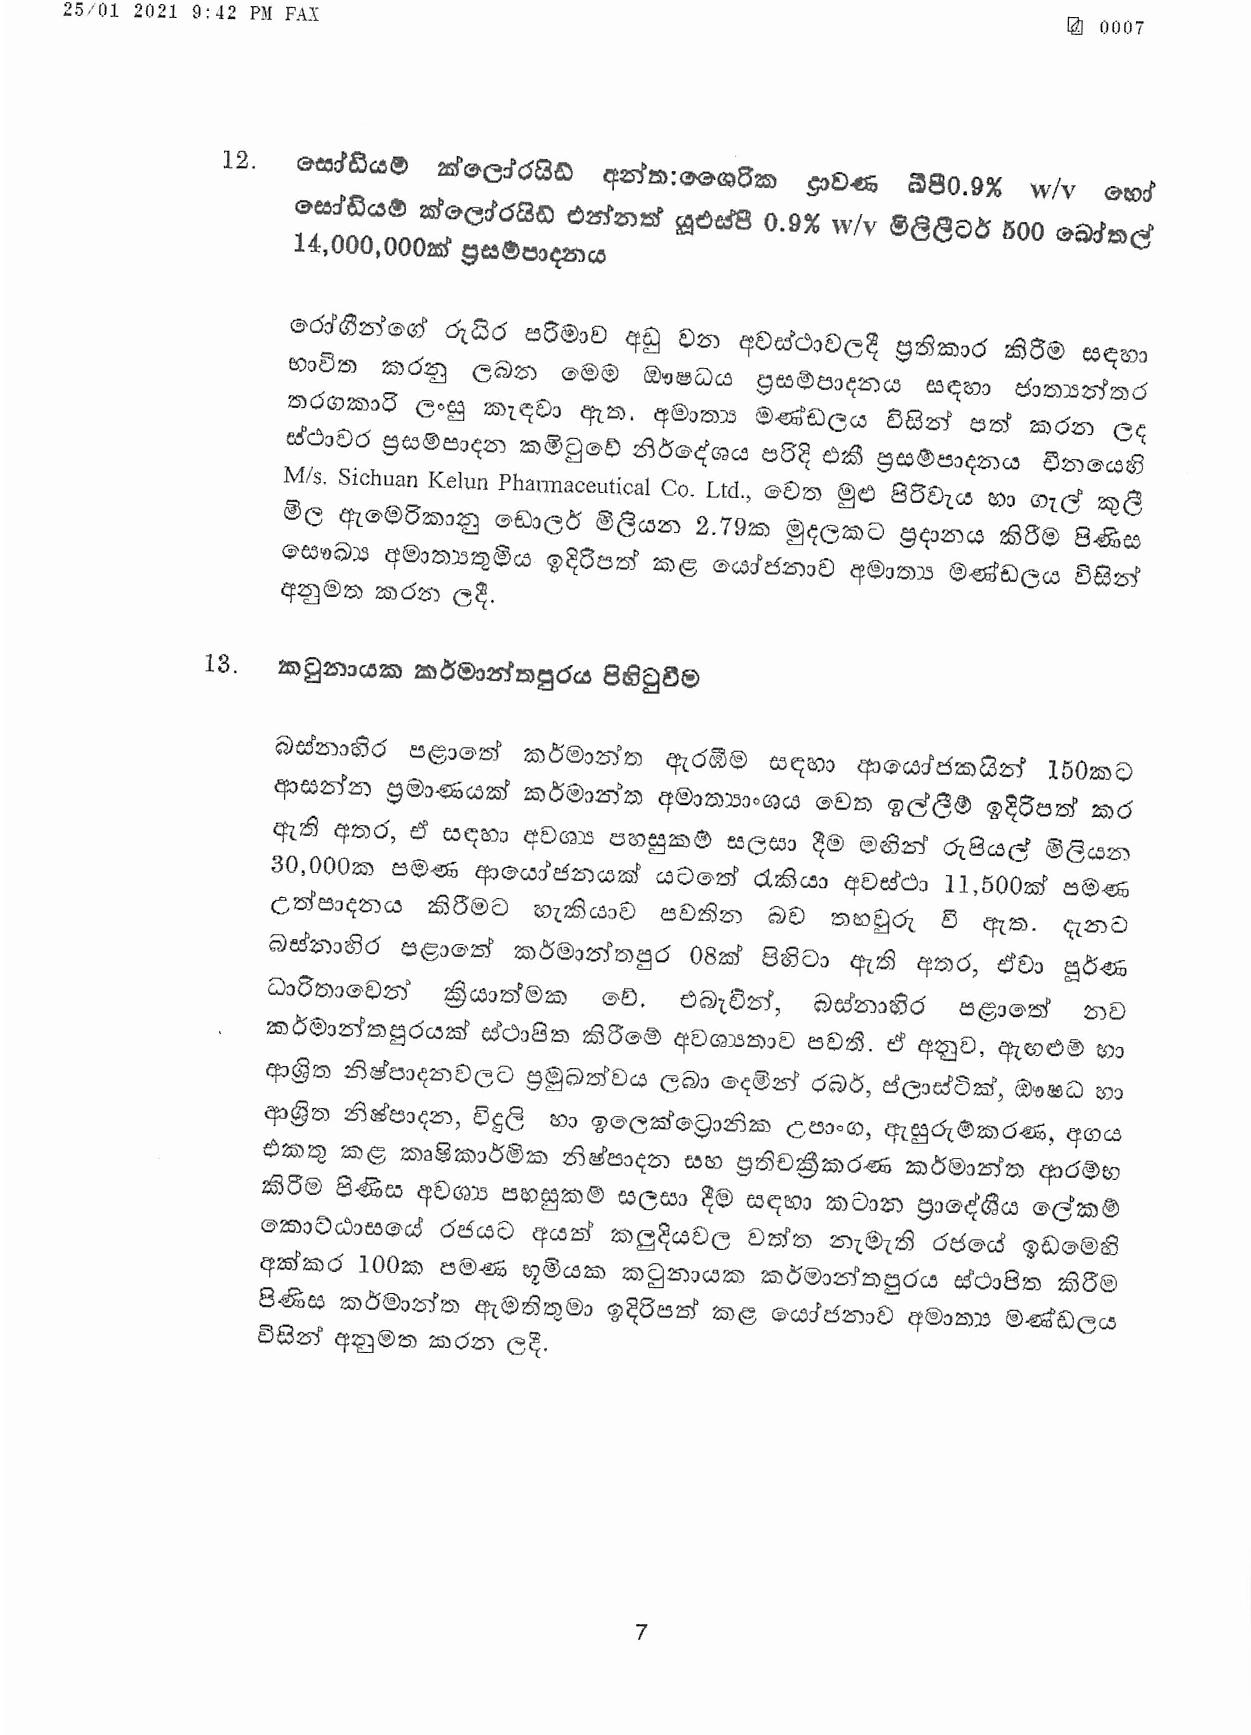 Cabinet Decision on 25.01.2021 1 page 007